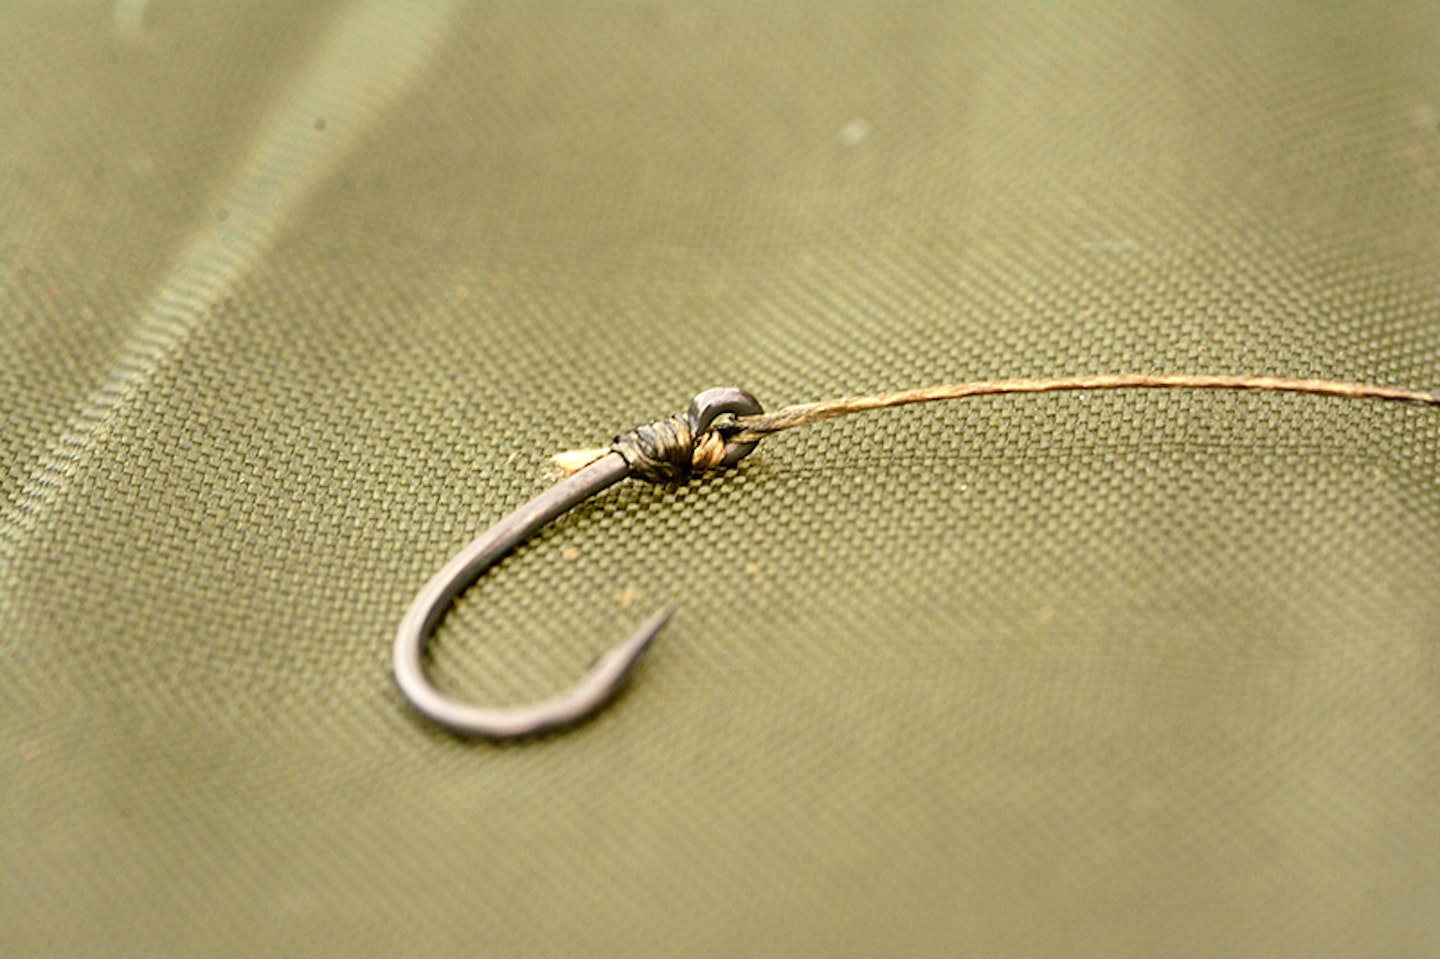 Take a short length of supple braid and attach to a curved shank hook using a knotless knot 